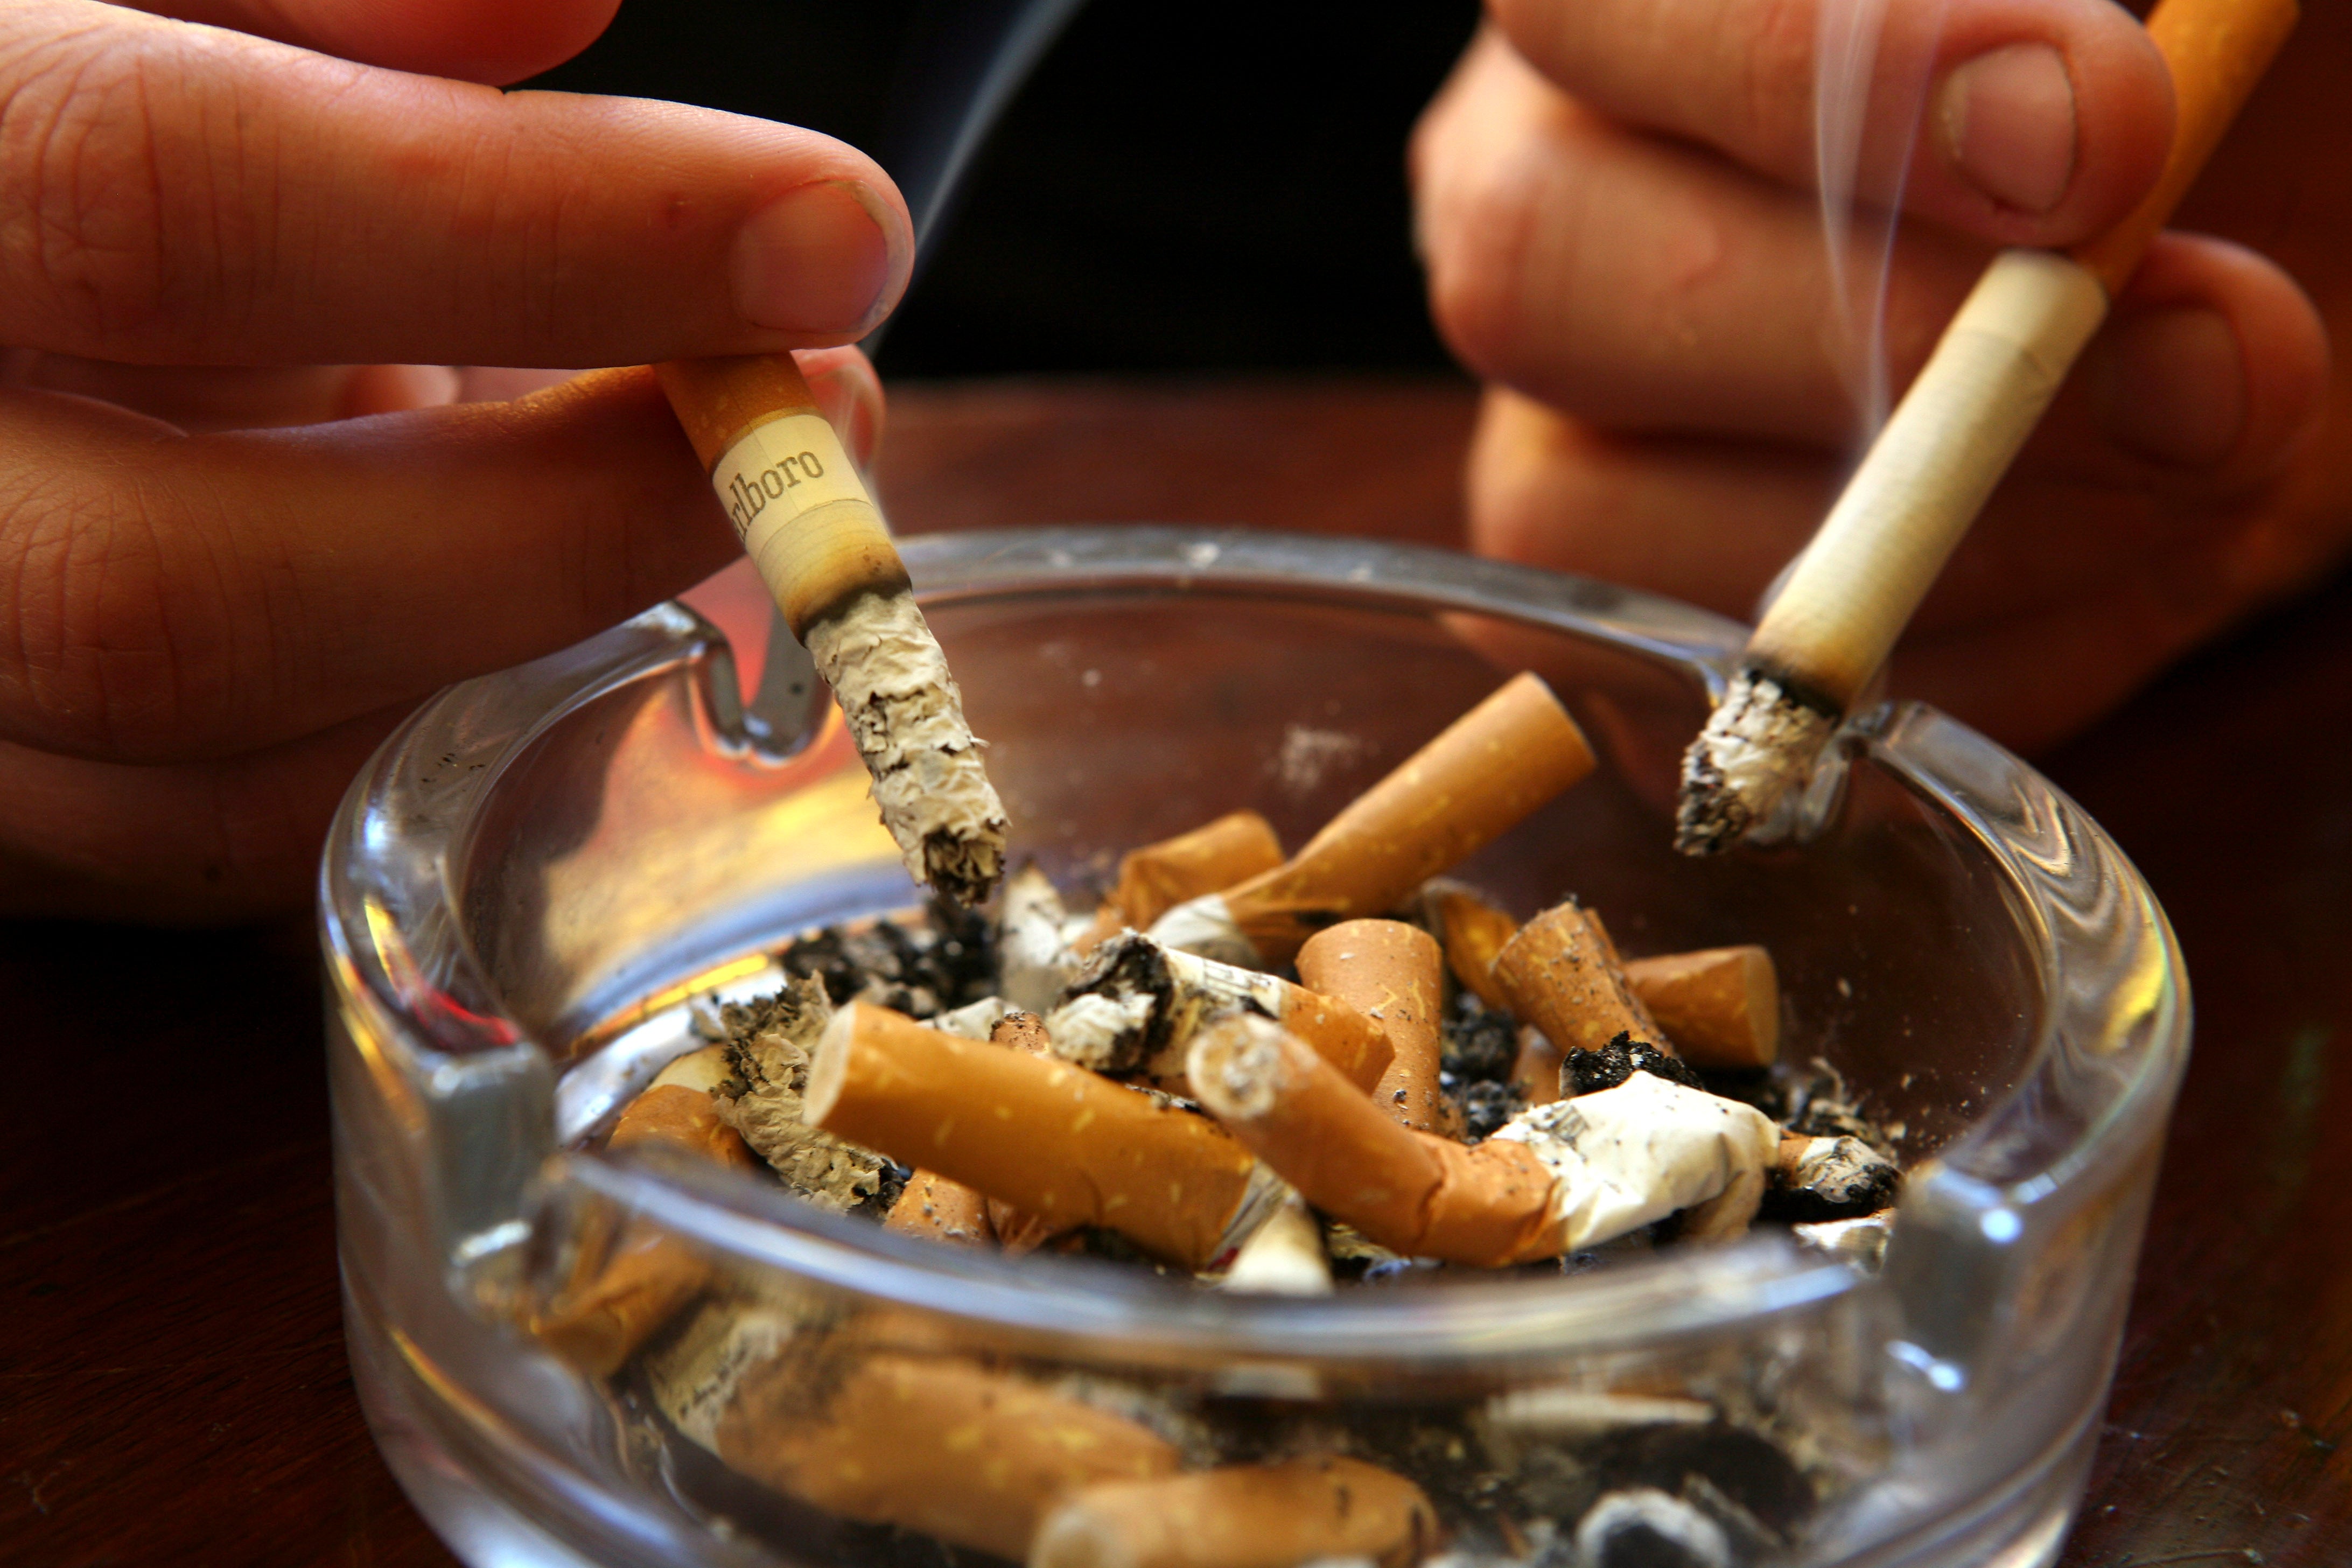 Nine out of 10 cases of lung cancer are caused by smoking